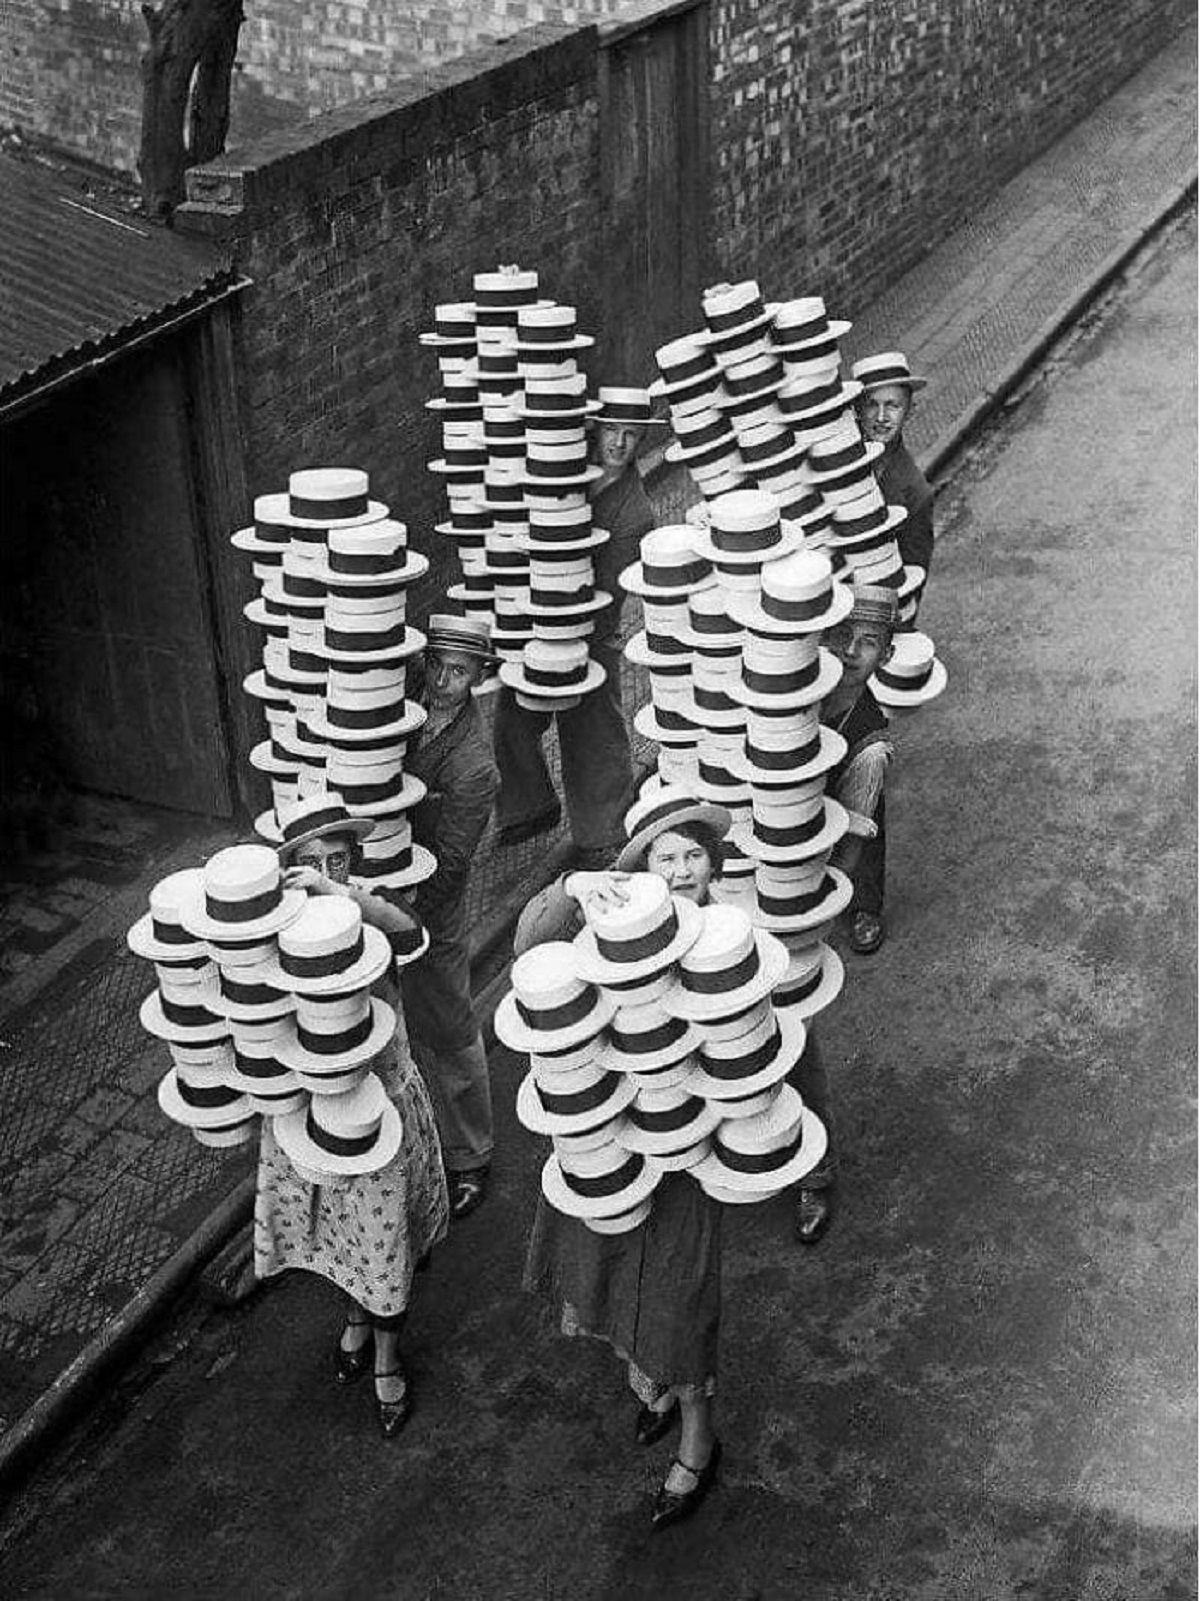 Straw Hats Made By Messrs Olney's Of Luton, Bedfordshire Being Carried To The Packing Rooms, 1933